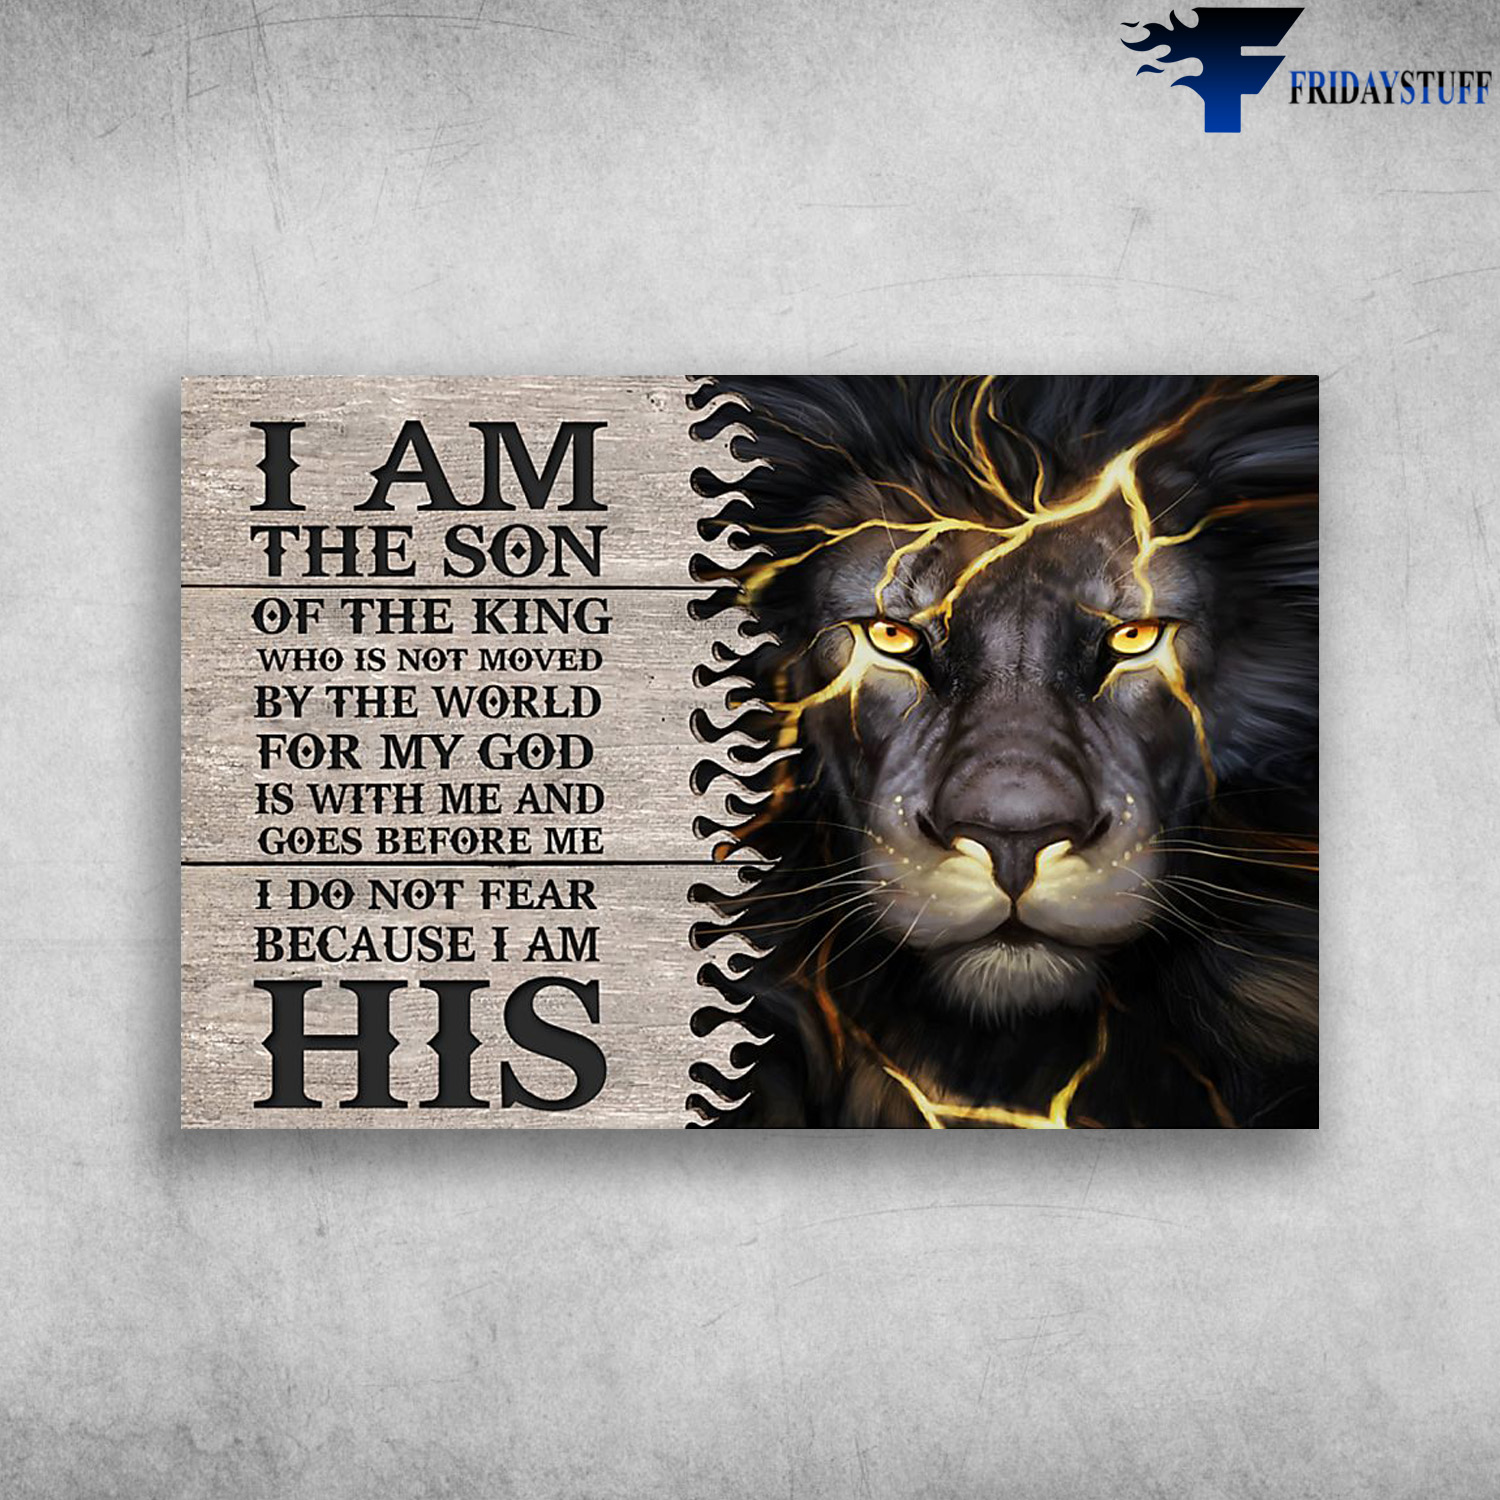 The Lion - I Am The Son Of The King, Who Is Not Moved By The World, For My God Is With Me And Goes Before Me, I Do Not Fear, Because I Am His